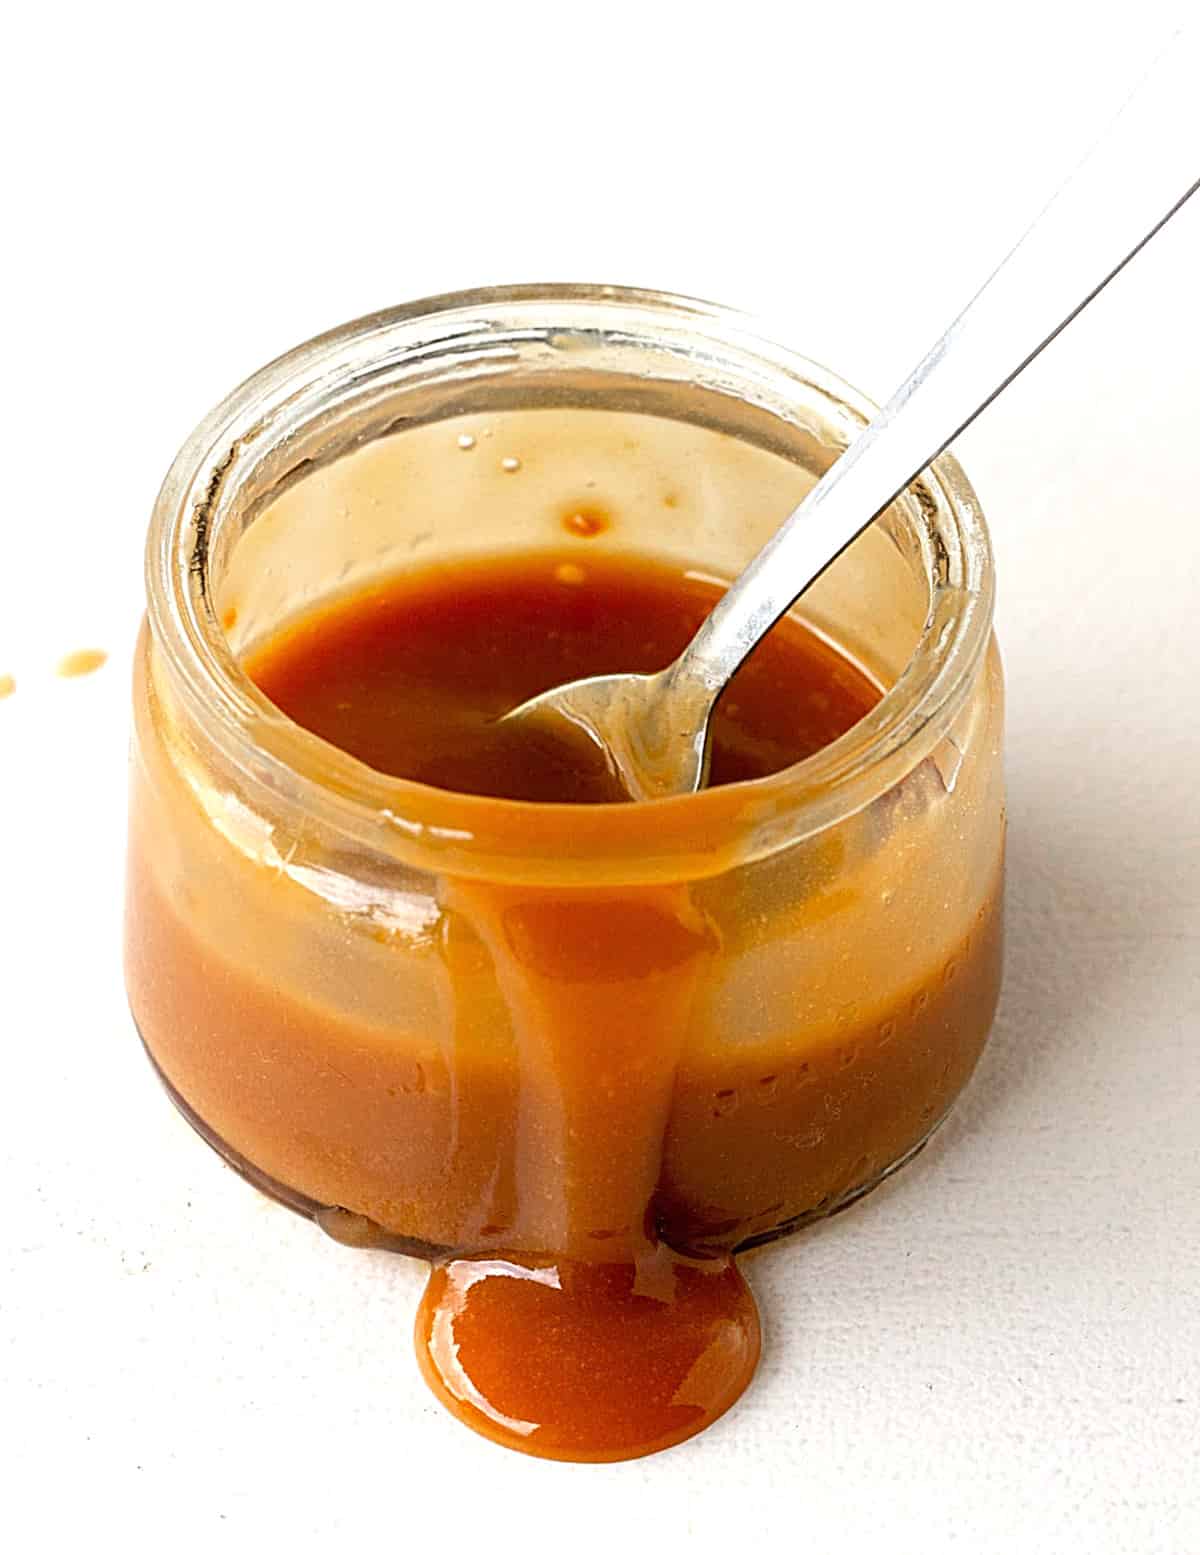 Jar of dripping dulce de leche with silver spoon inside; white surface